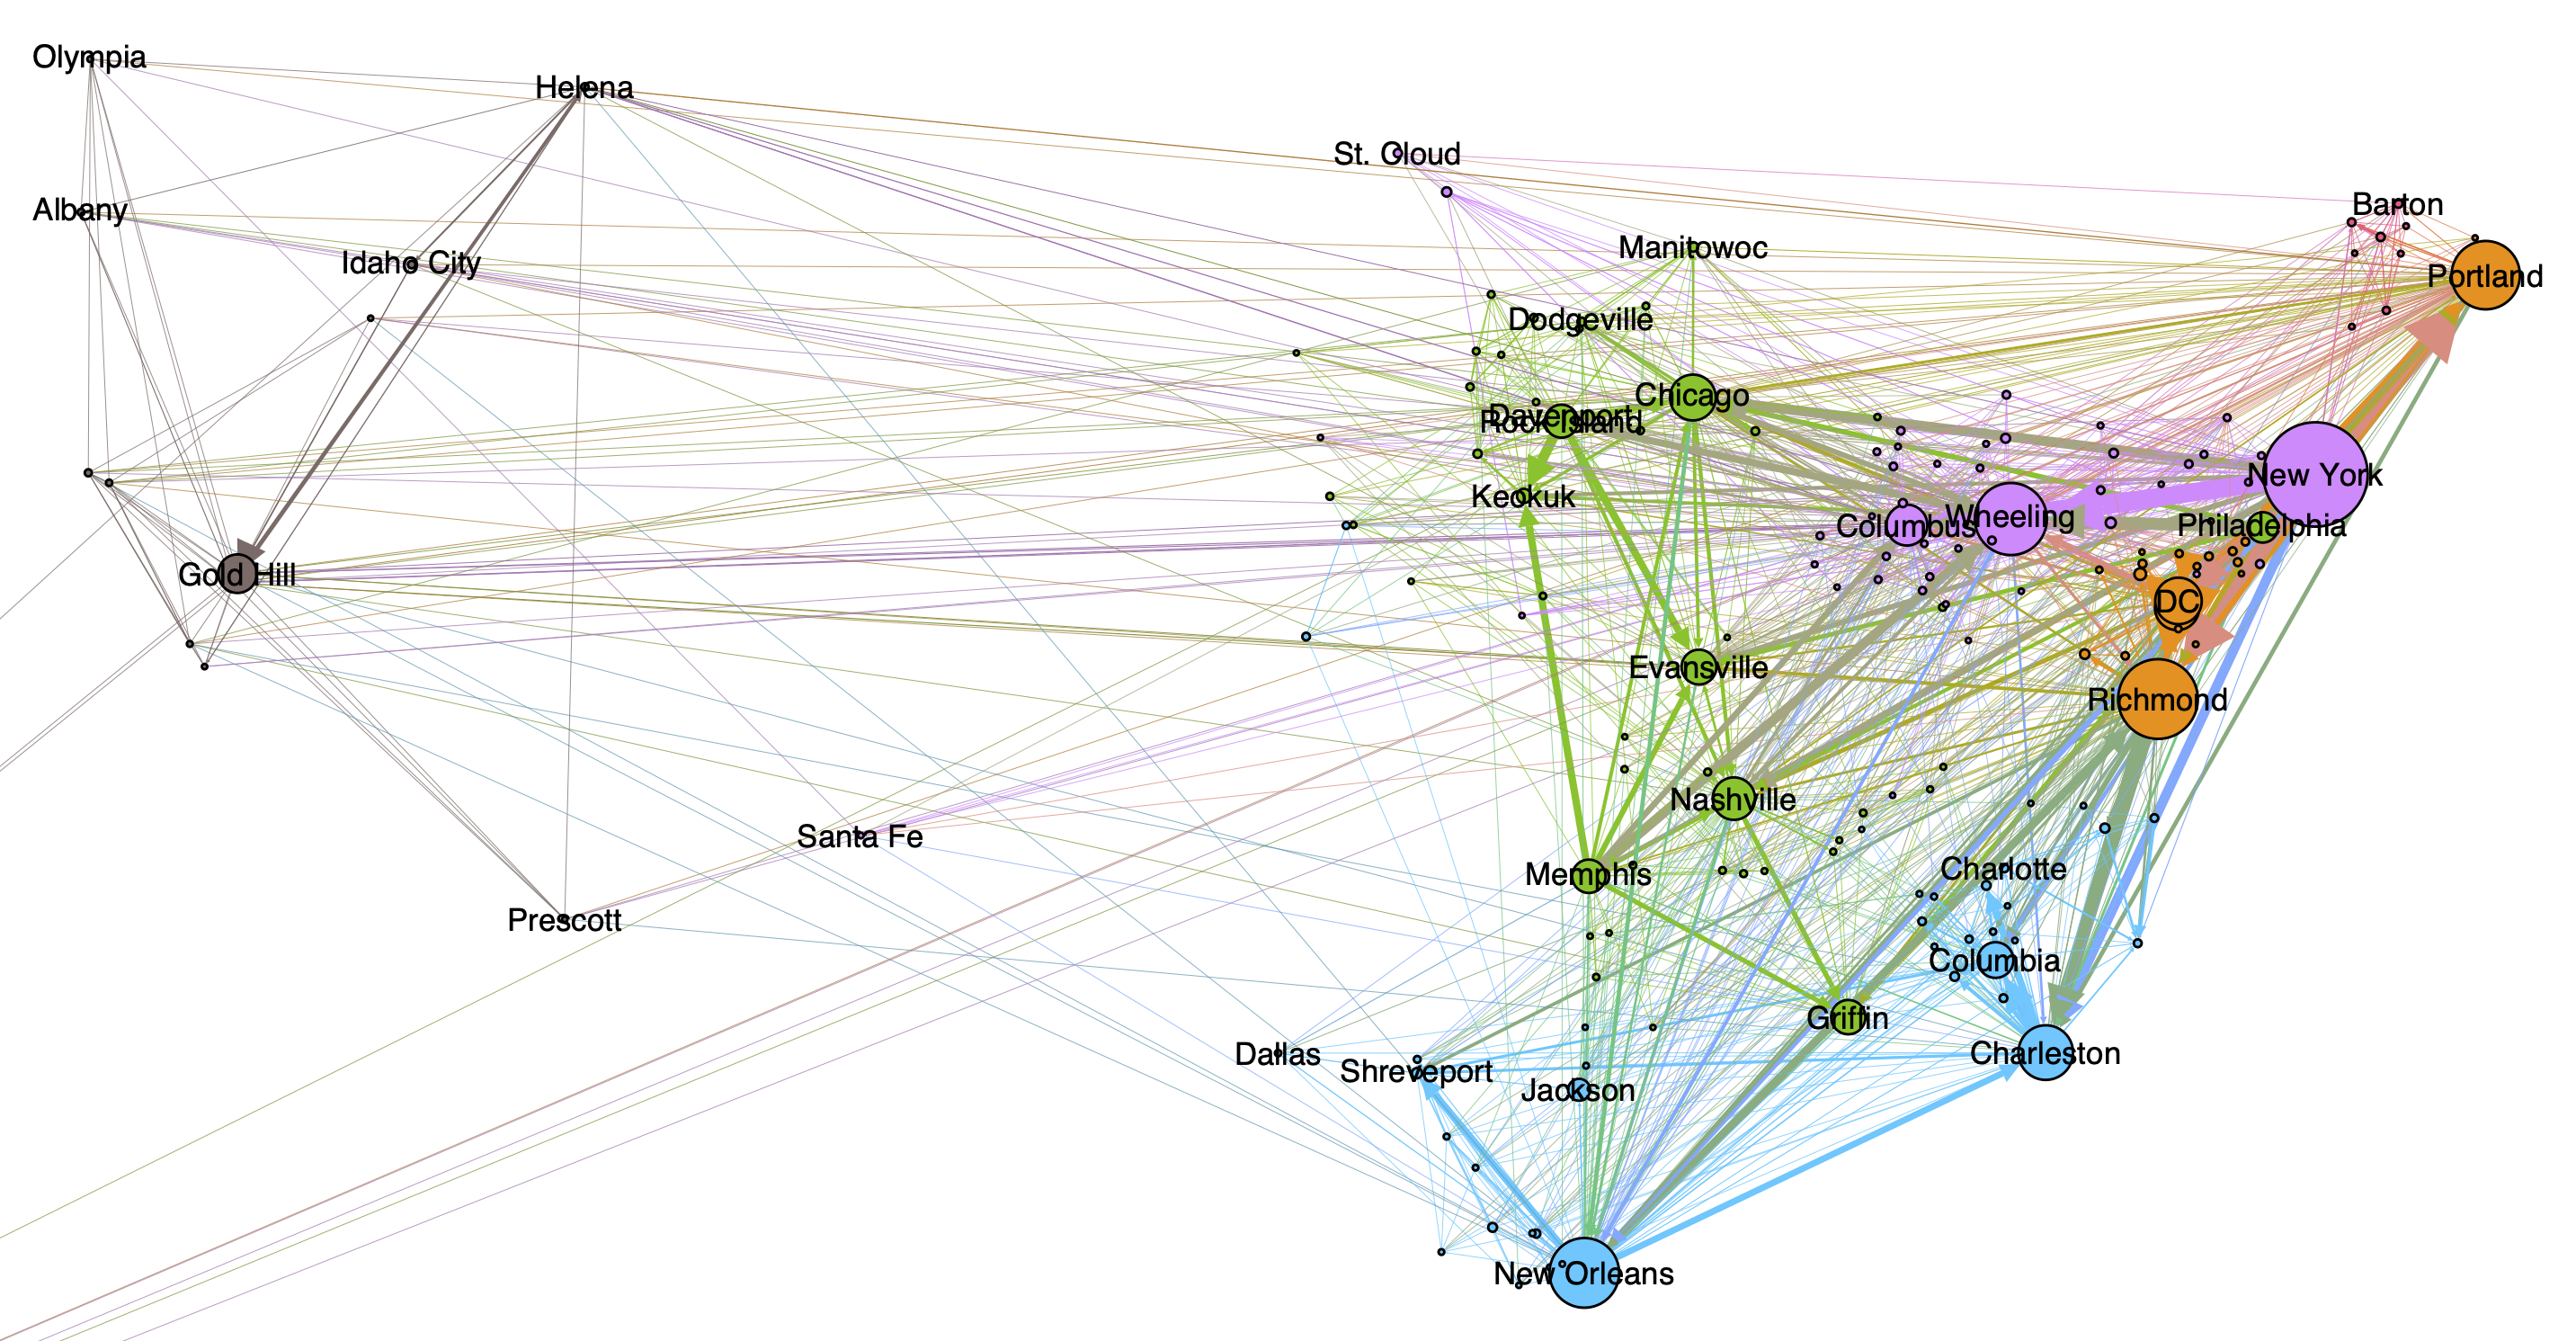 A network graph of US newspapers based on information cascades